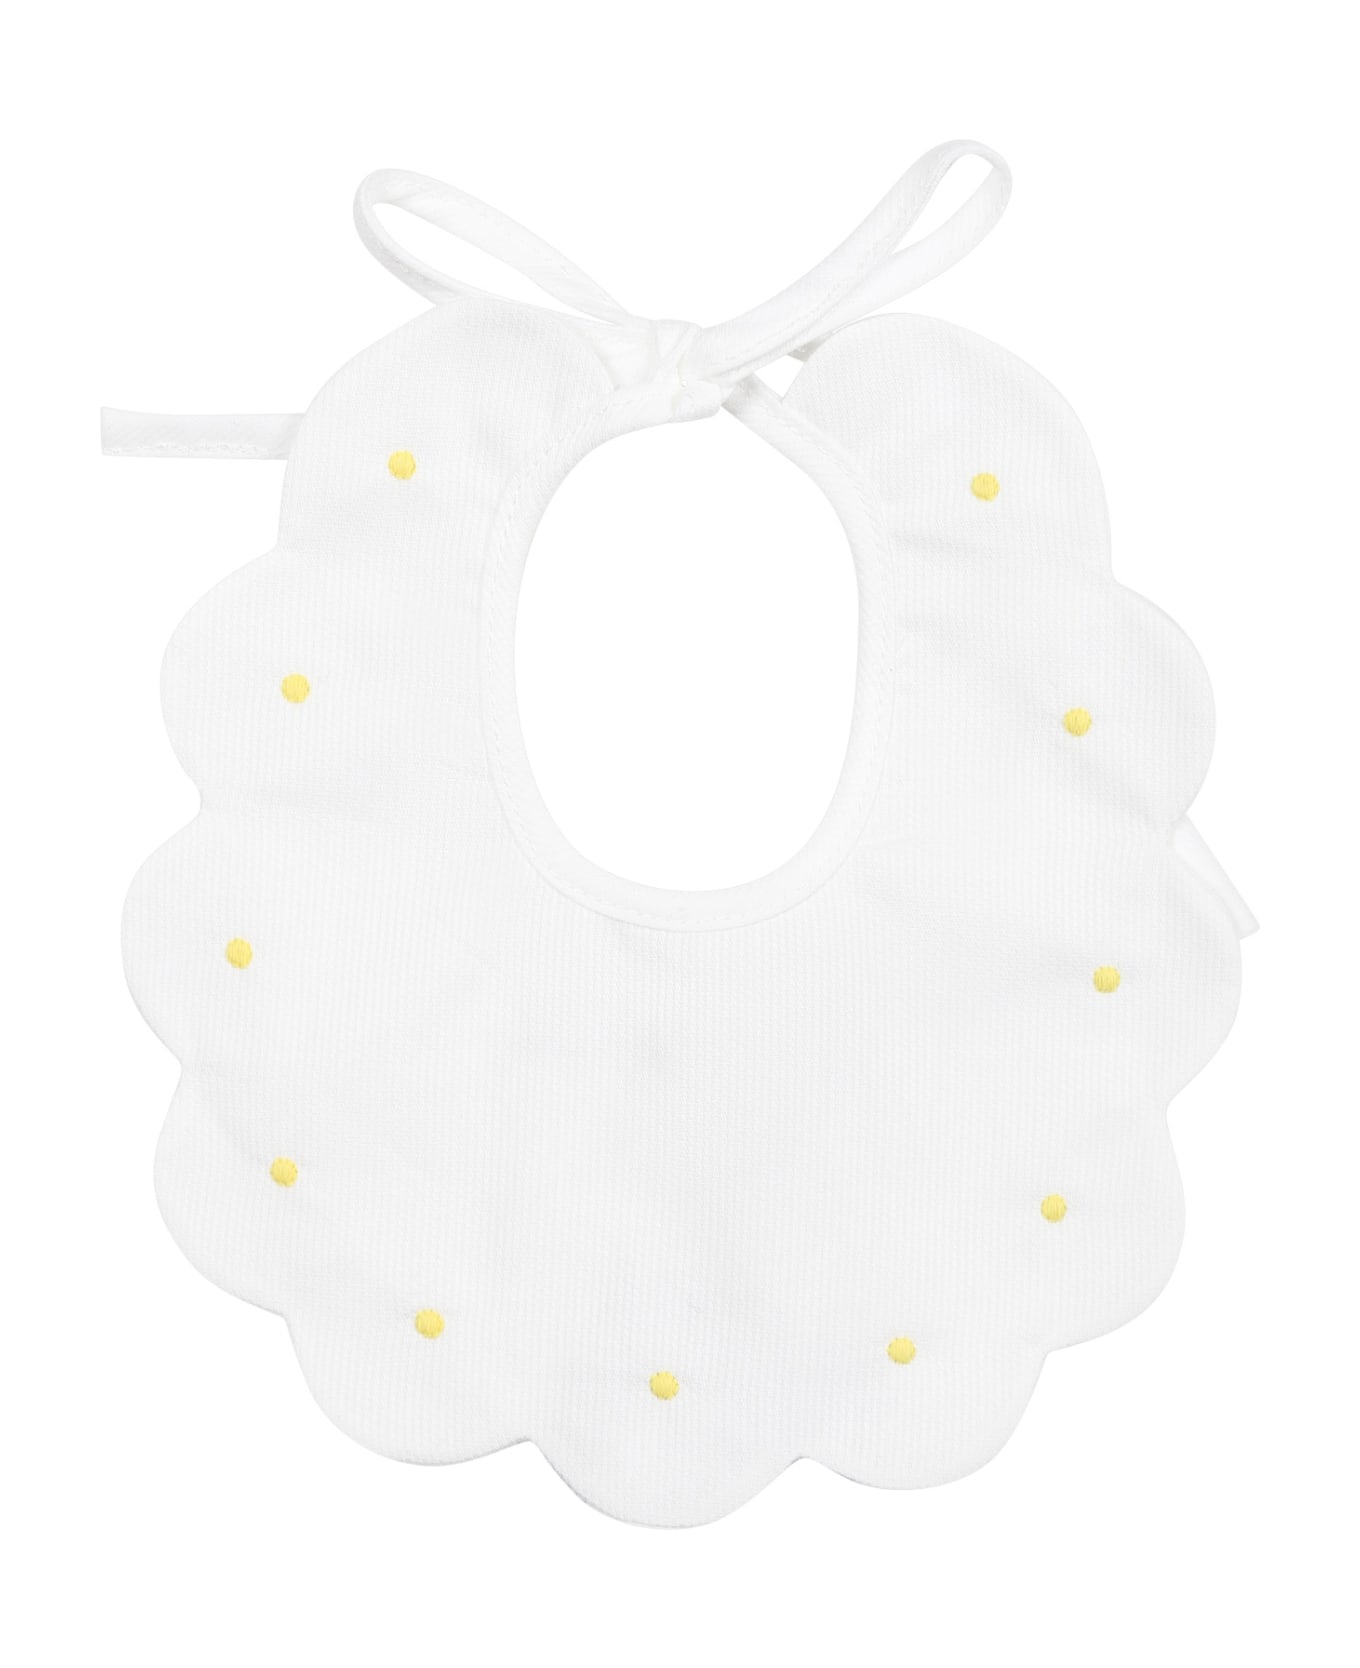 Little Bear White Bib For Baby Kids With Polka Dots - White アクセサリー＆ギフト